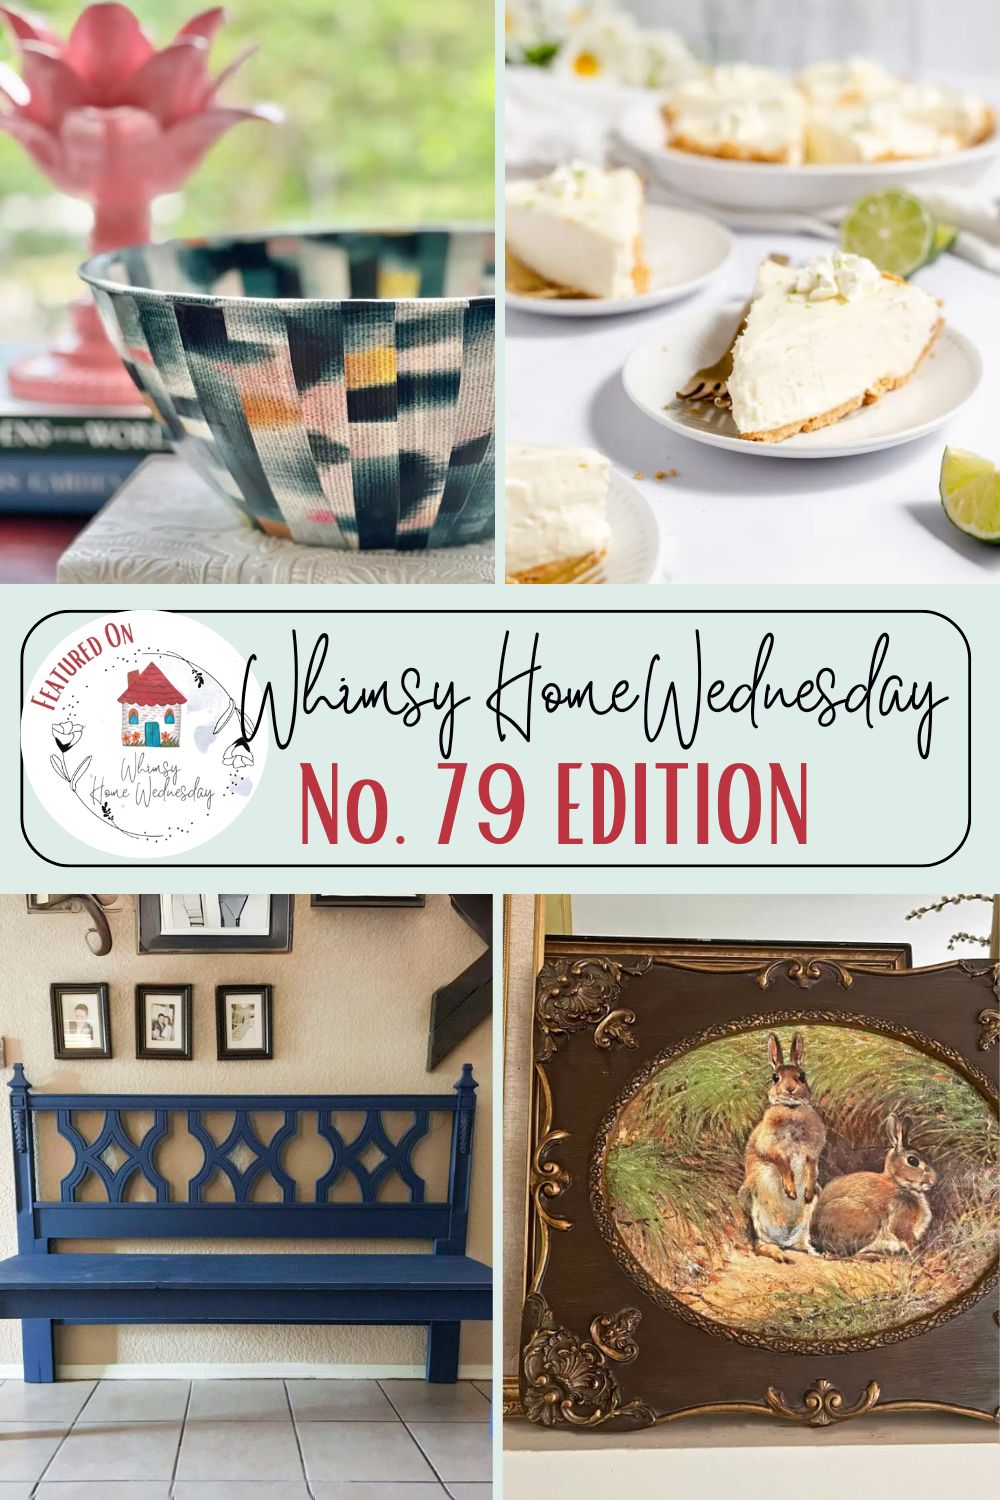 Join us on Whimsy Home Wednesday Blog Link Party No. 79 and see host projects, the features from the previous week and link up your posts!